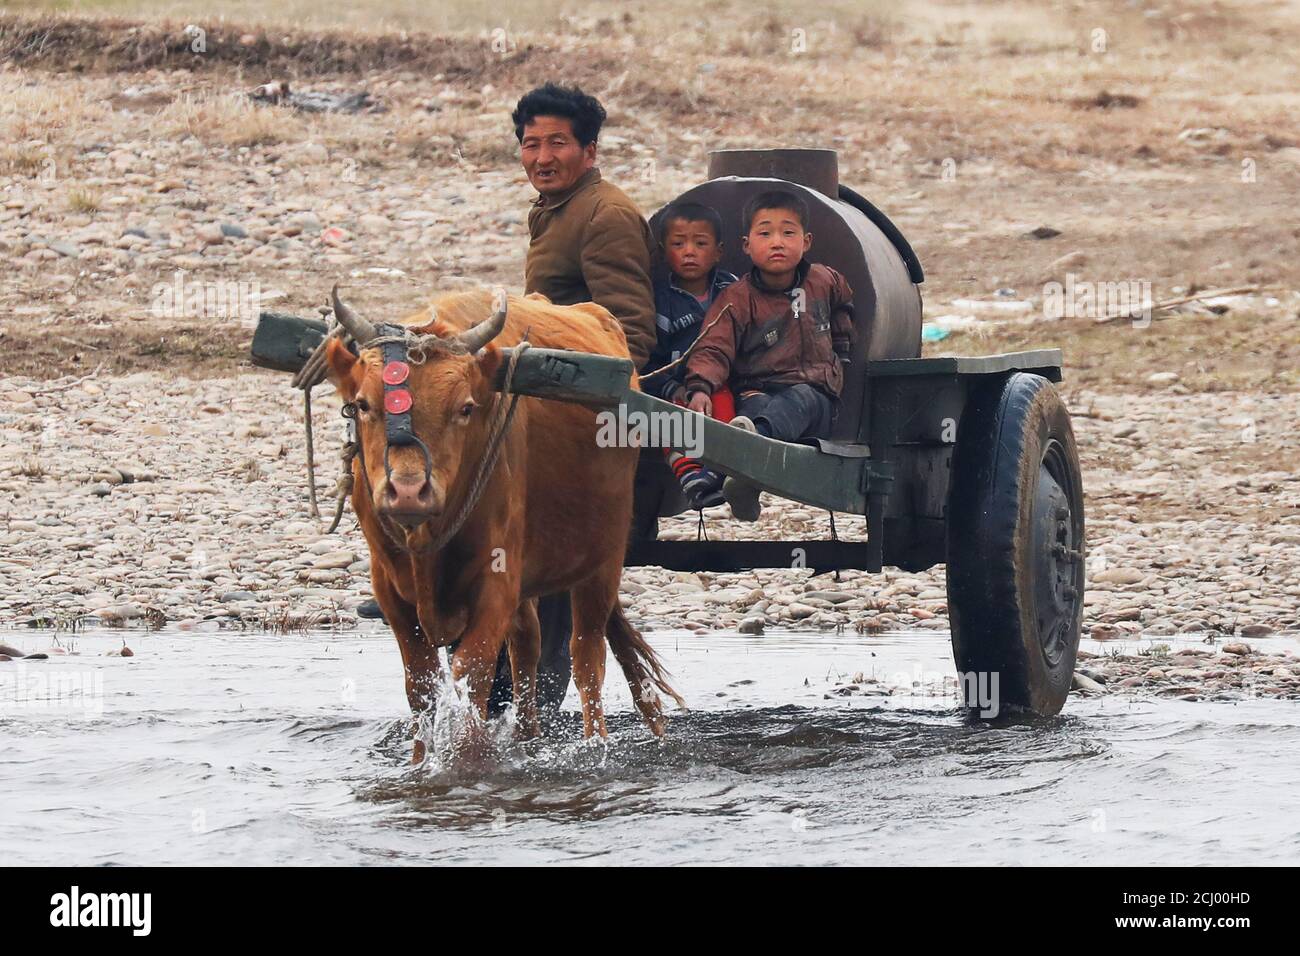 A man and boys enter the water on an ox-cart from the North Korean side of  the Yalu River, just north of the town of Sinuiju, North Korea, March 30,  2017. REUTERS/Damir